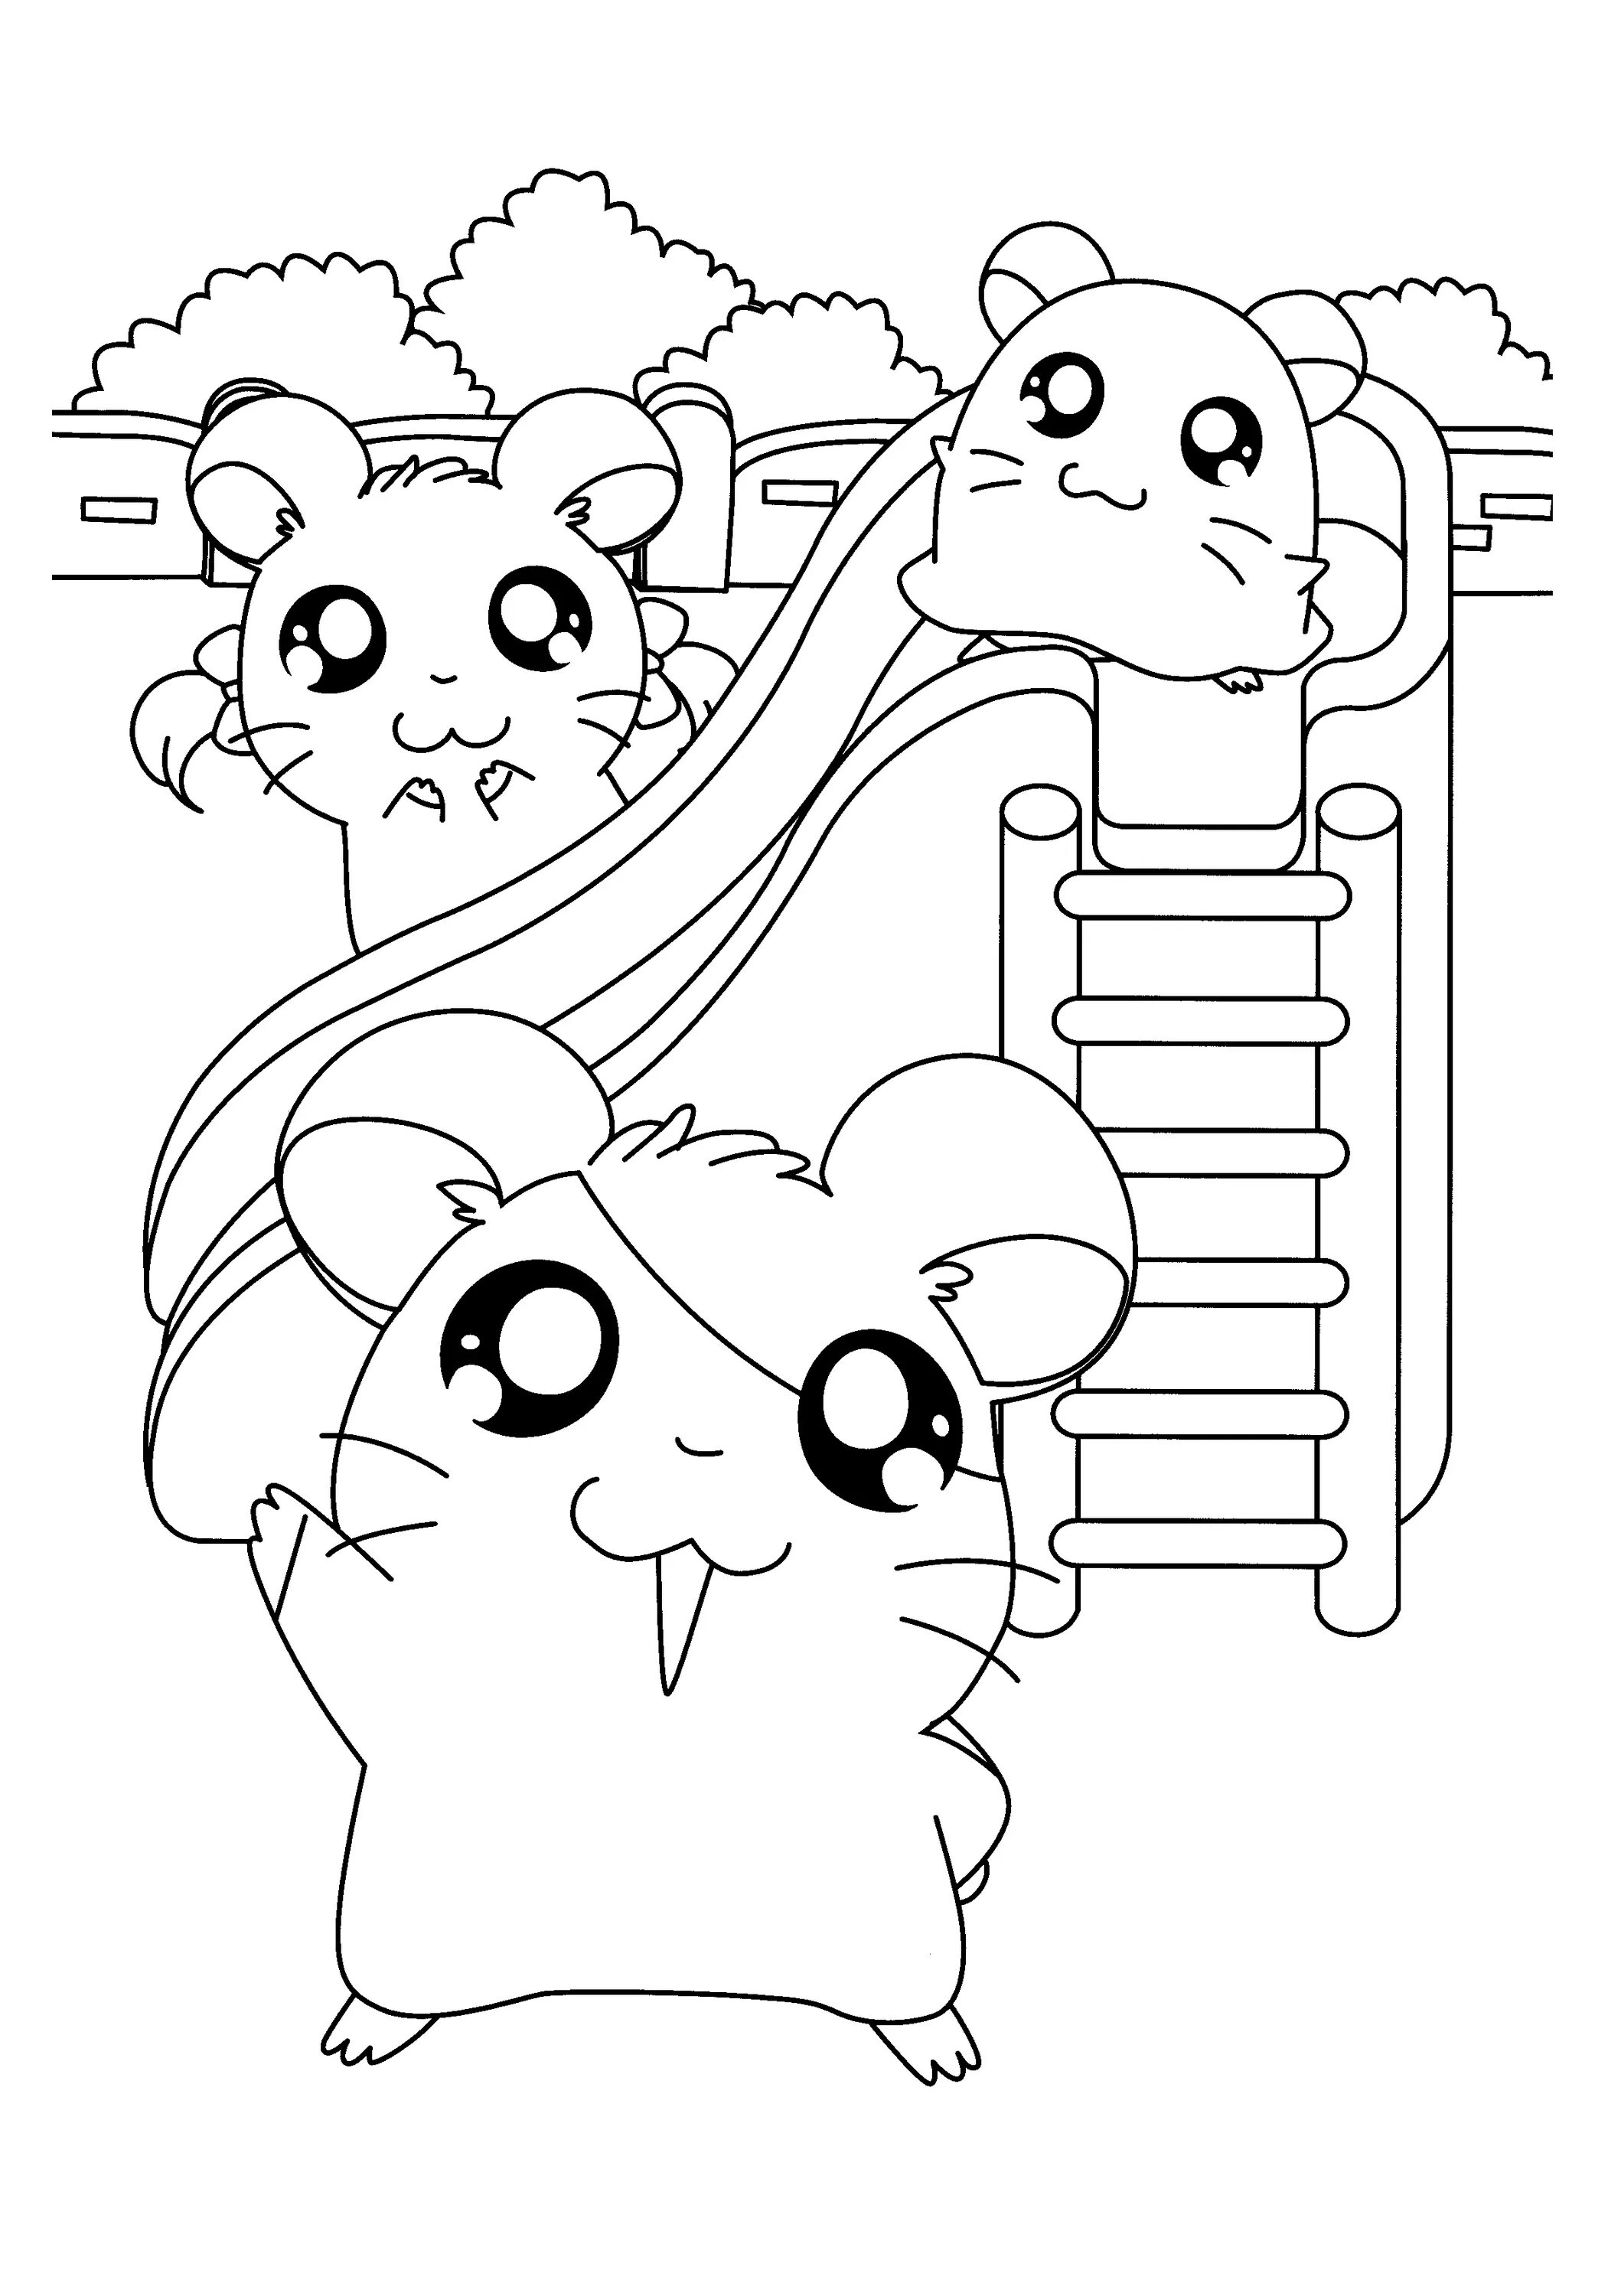 Coloring giggly for hamster girls